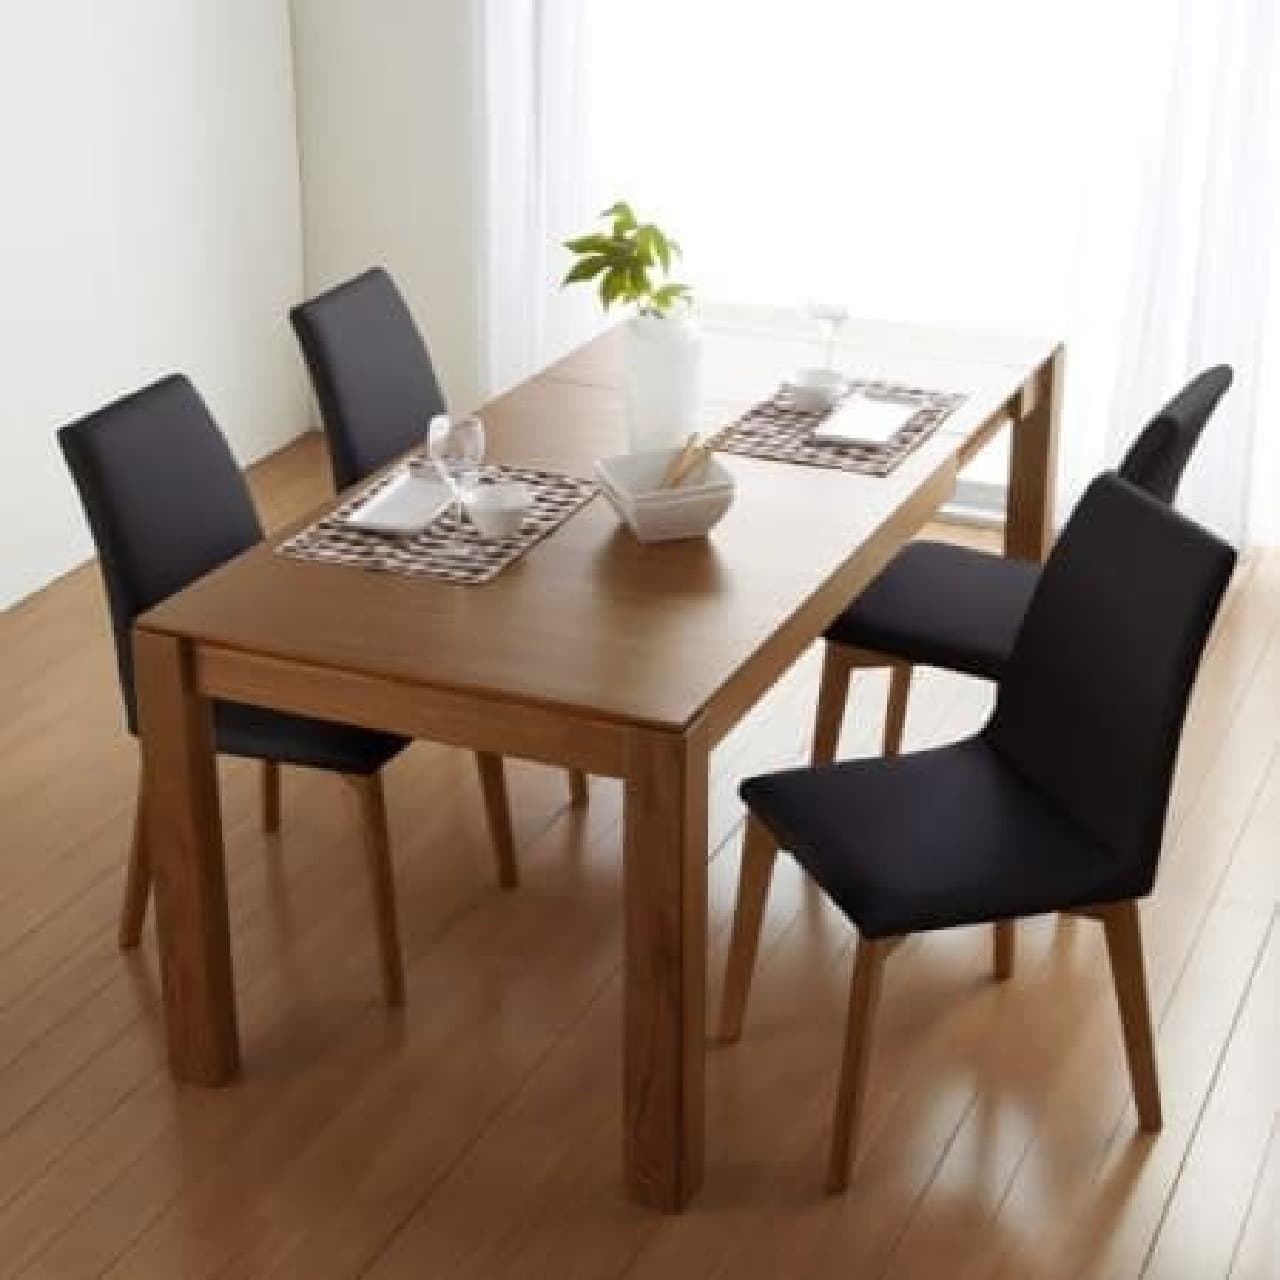 A dining table with a soft and gentle impression